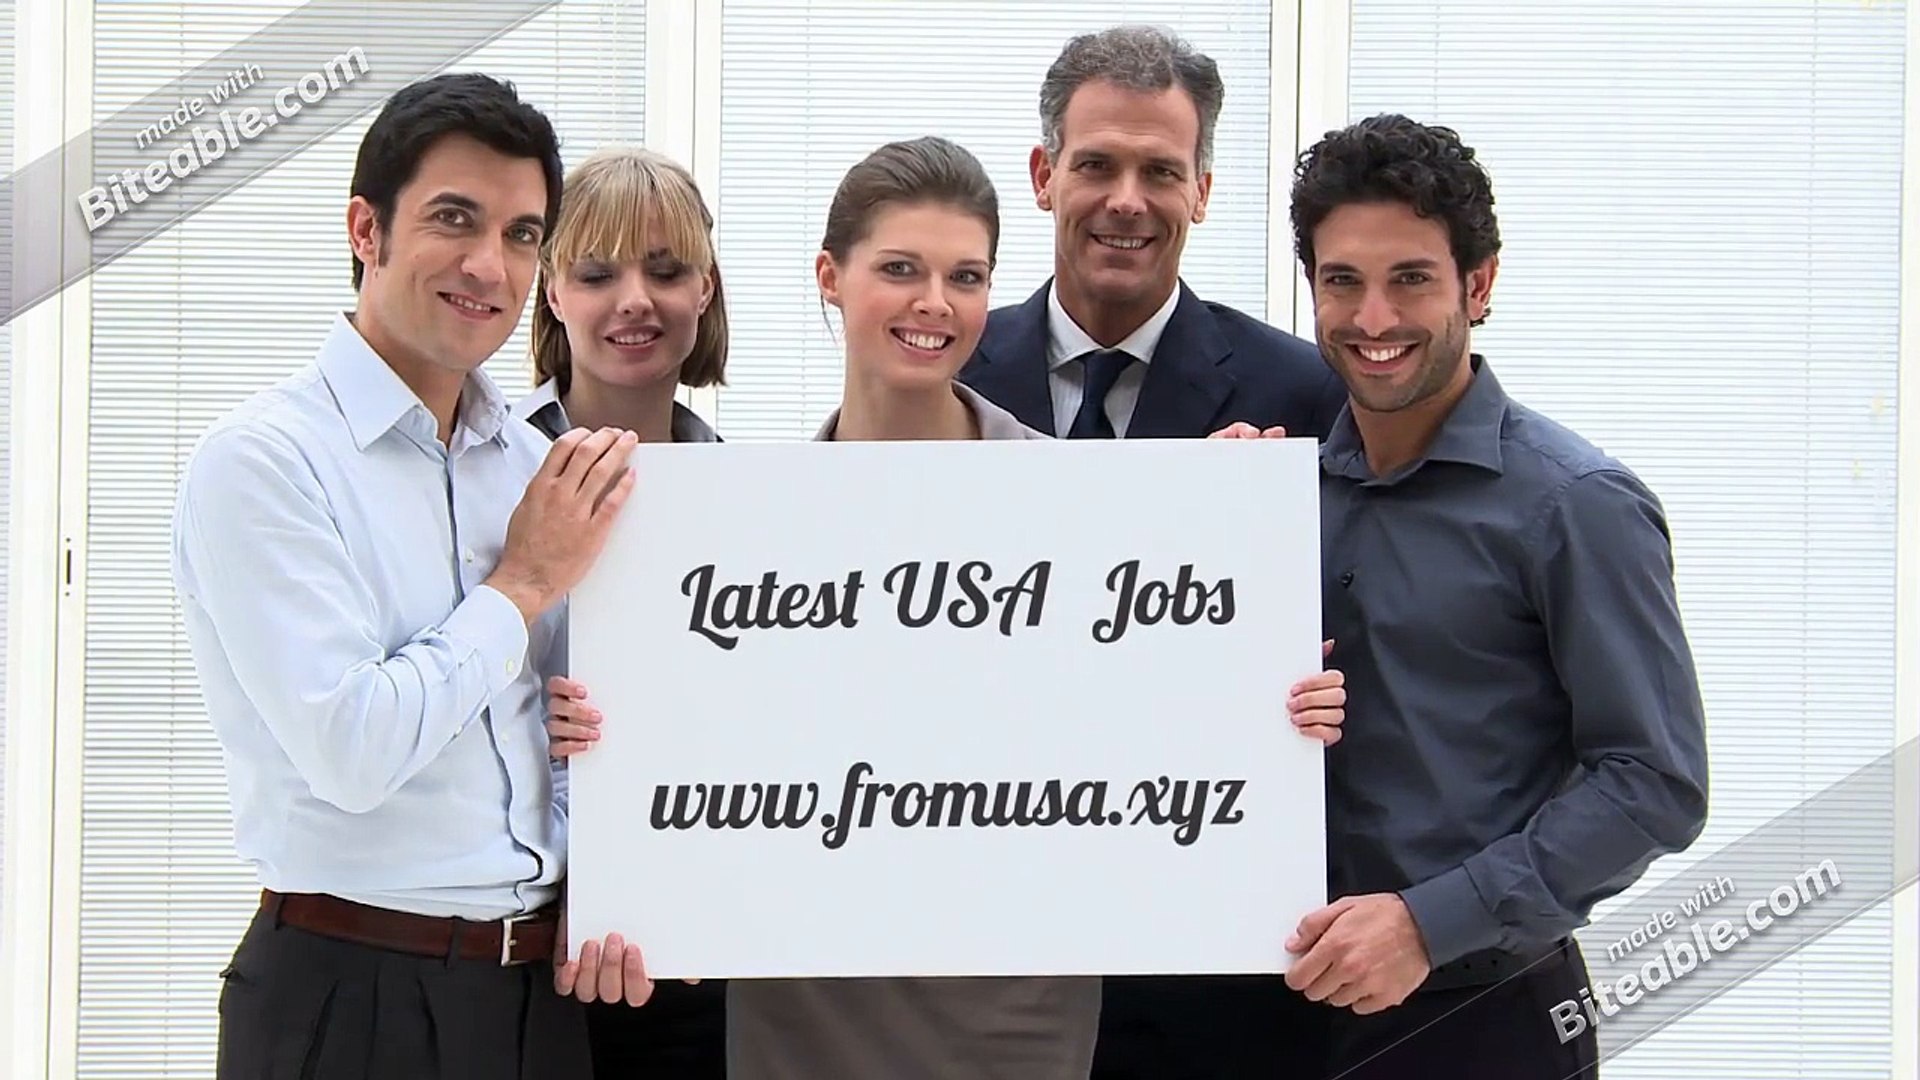 FIND LATEST JOBS IN USA